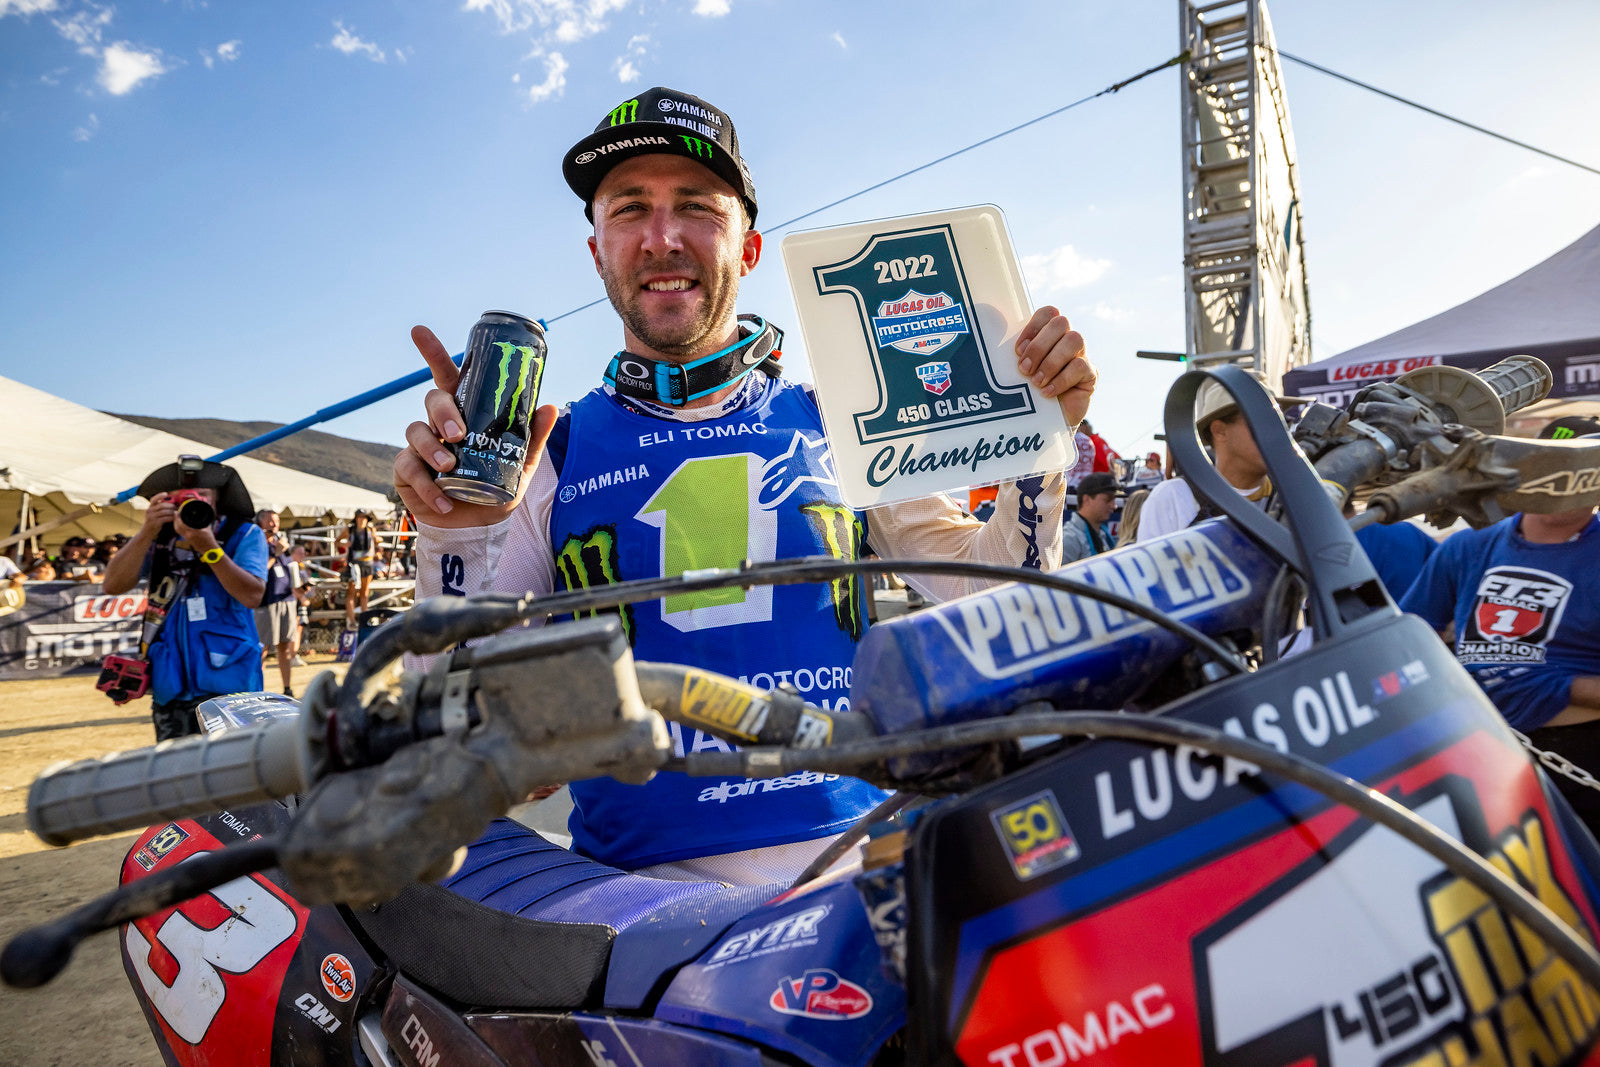 ELI TOMAC CROWNED 2022 AMA 450 PRO MOTOCROSS CHAMPION AS CHASE SEXTON AND JASON ANDERSON MAKE IT AN ALPINESTARS 1-2-3 FINISH IN THE CHAMPIONSHIP AT PALA, CA